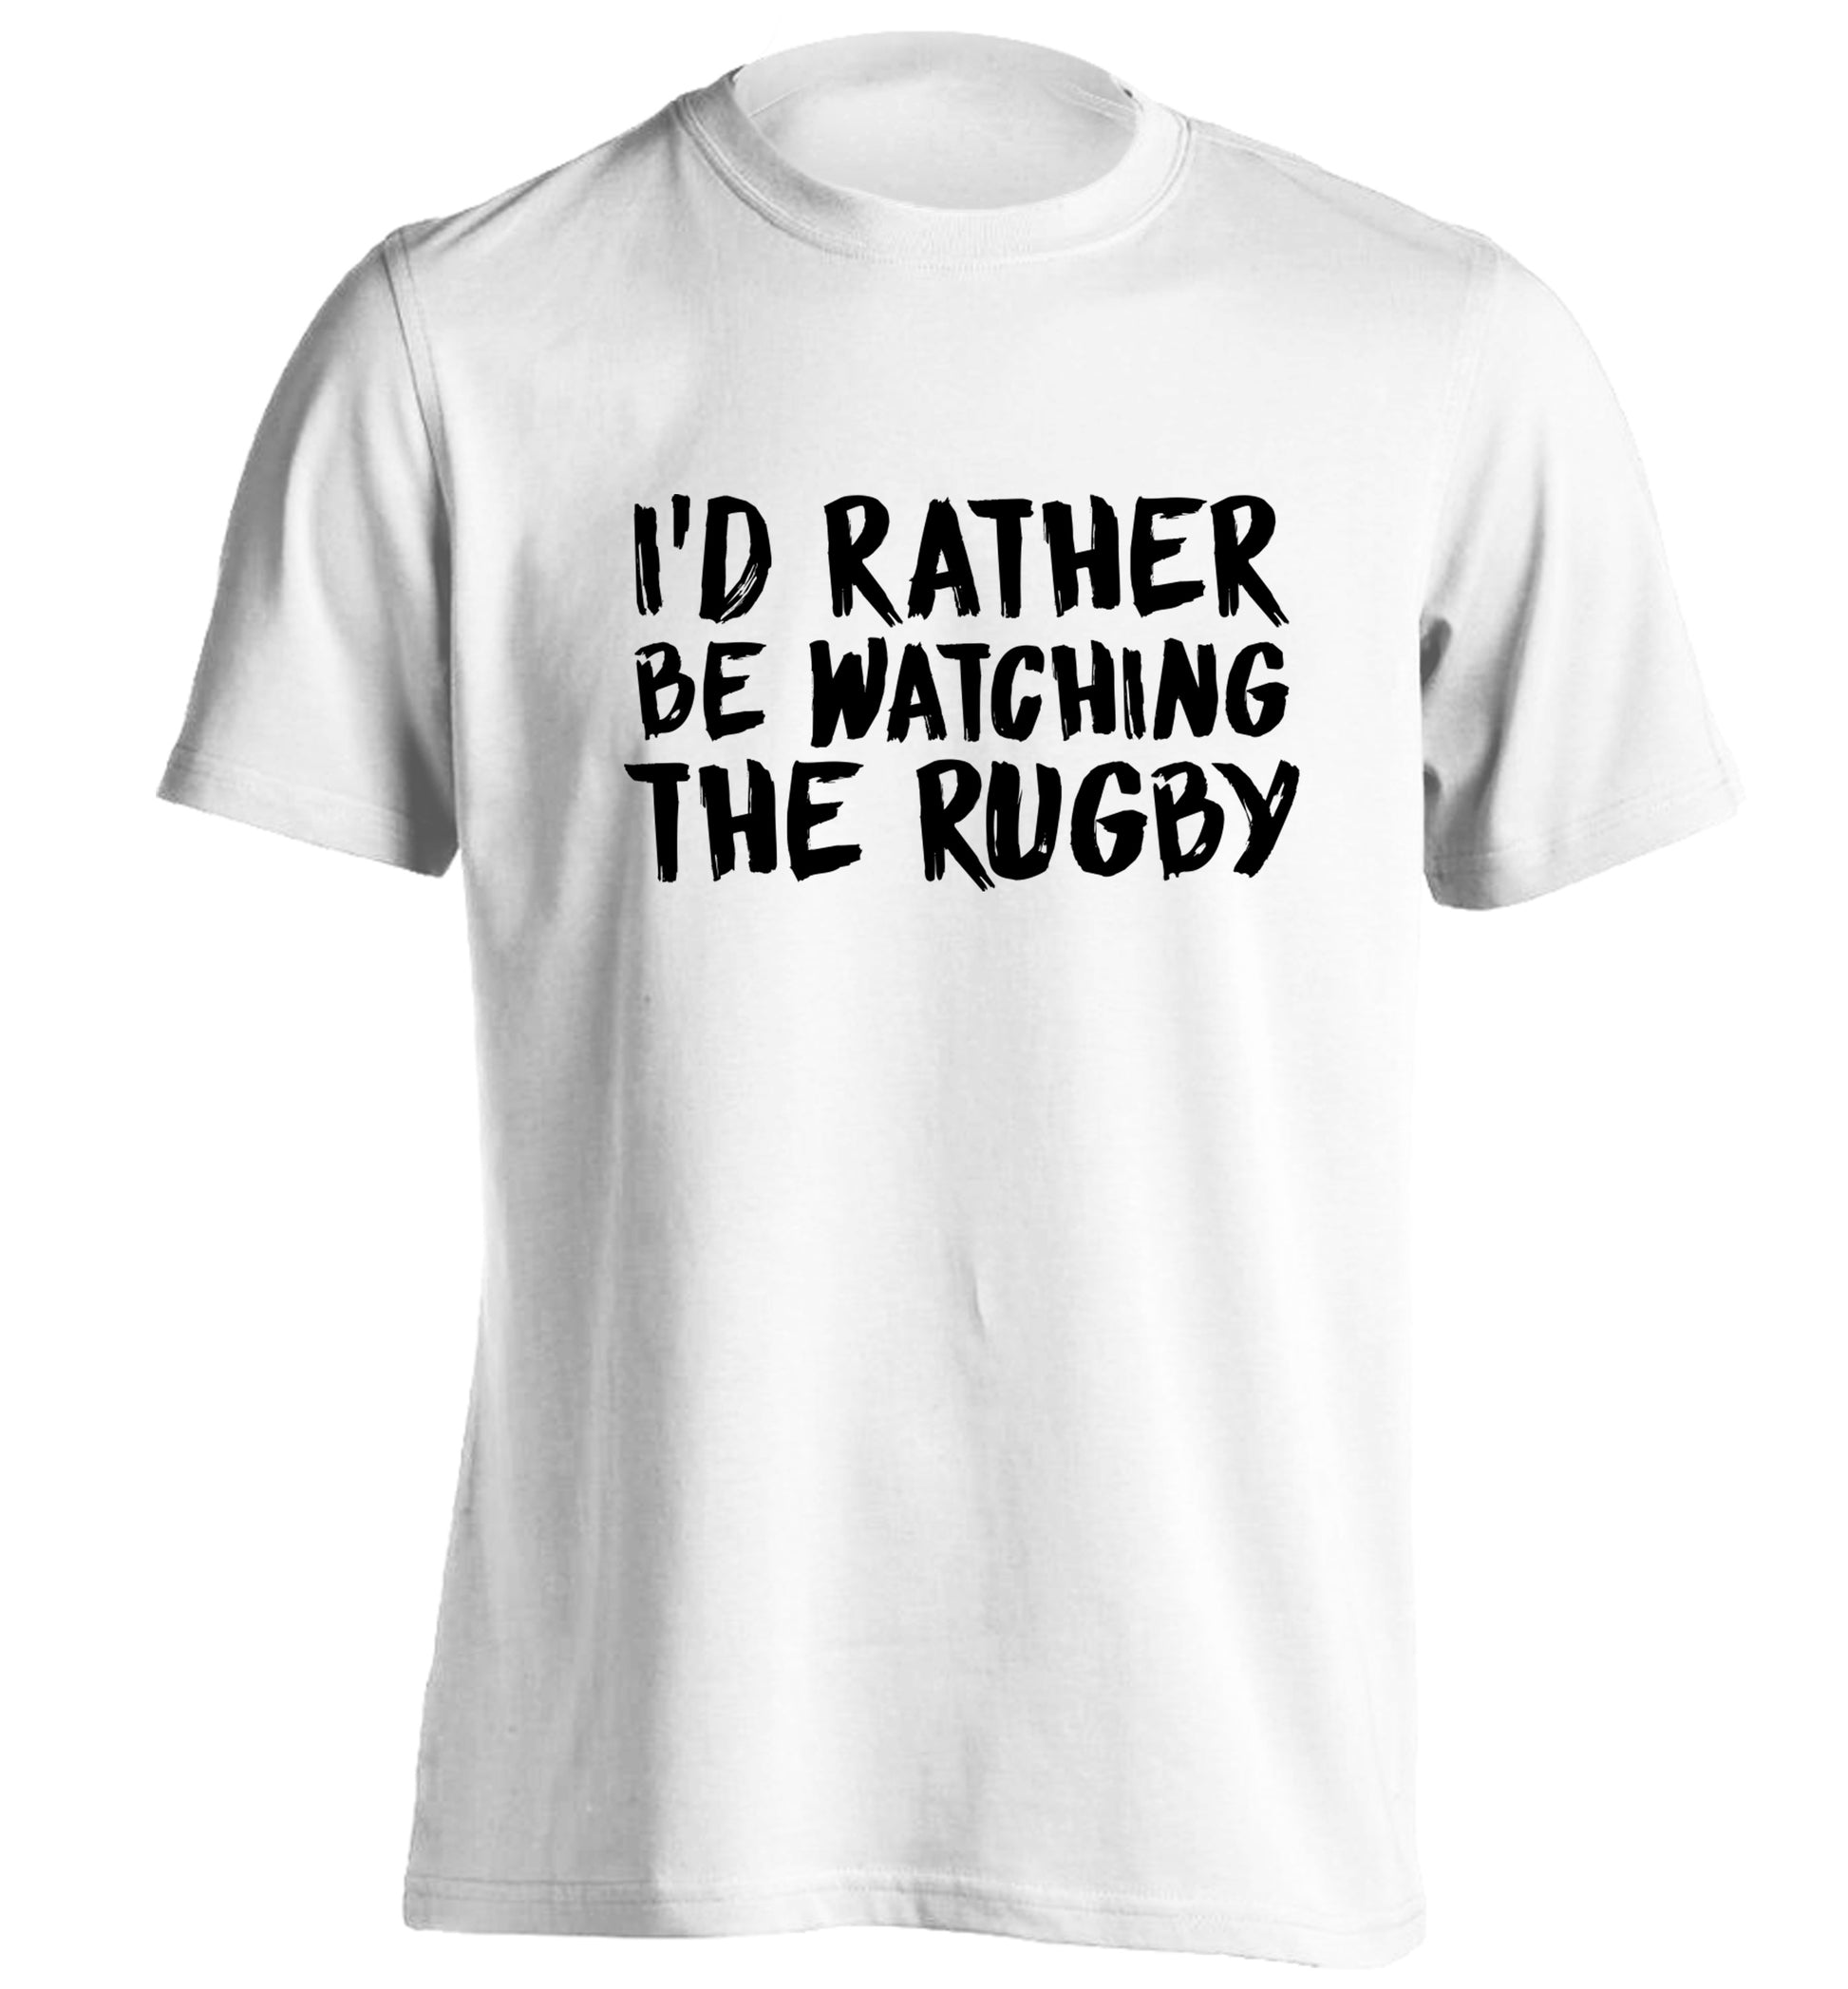 I'd rather be watching the rugby adults unisex white Tshirt 2XL